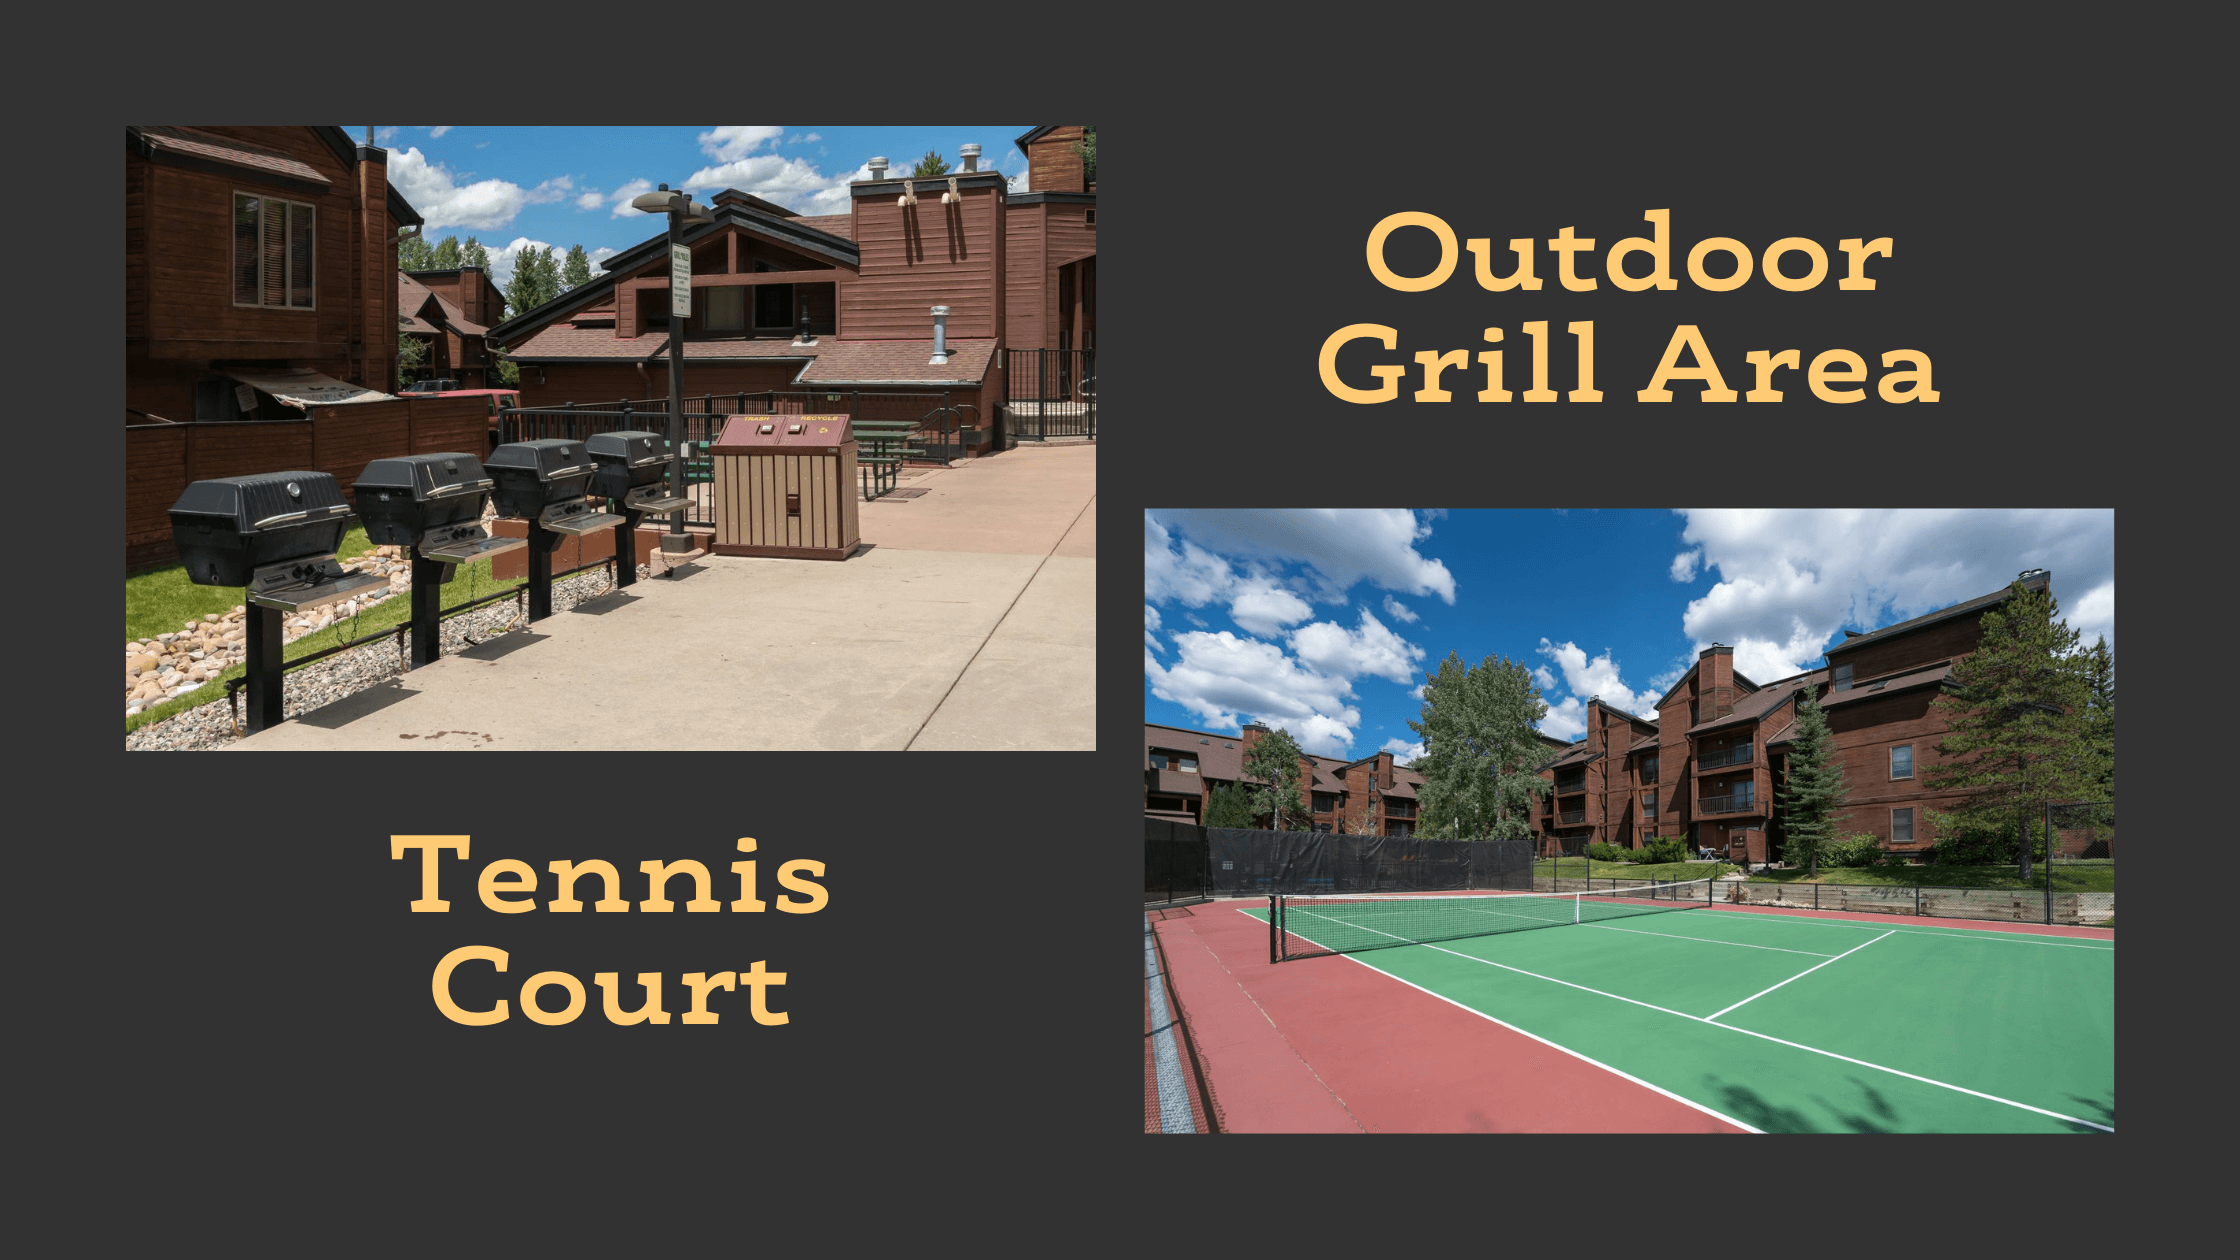 Timber Run by Retreatia Outdooer Grill Area and Tennis Court